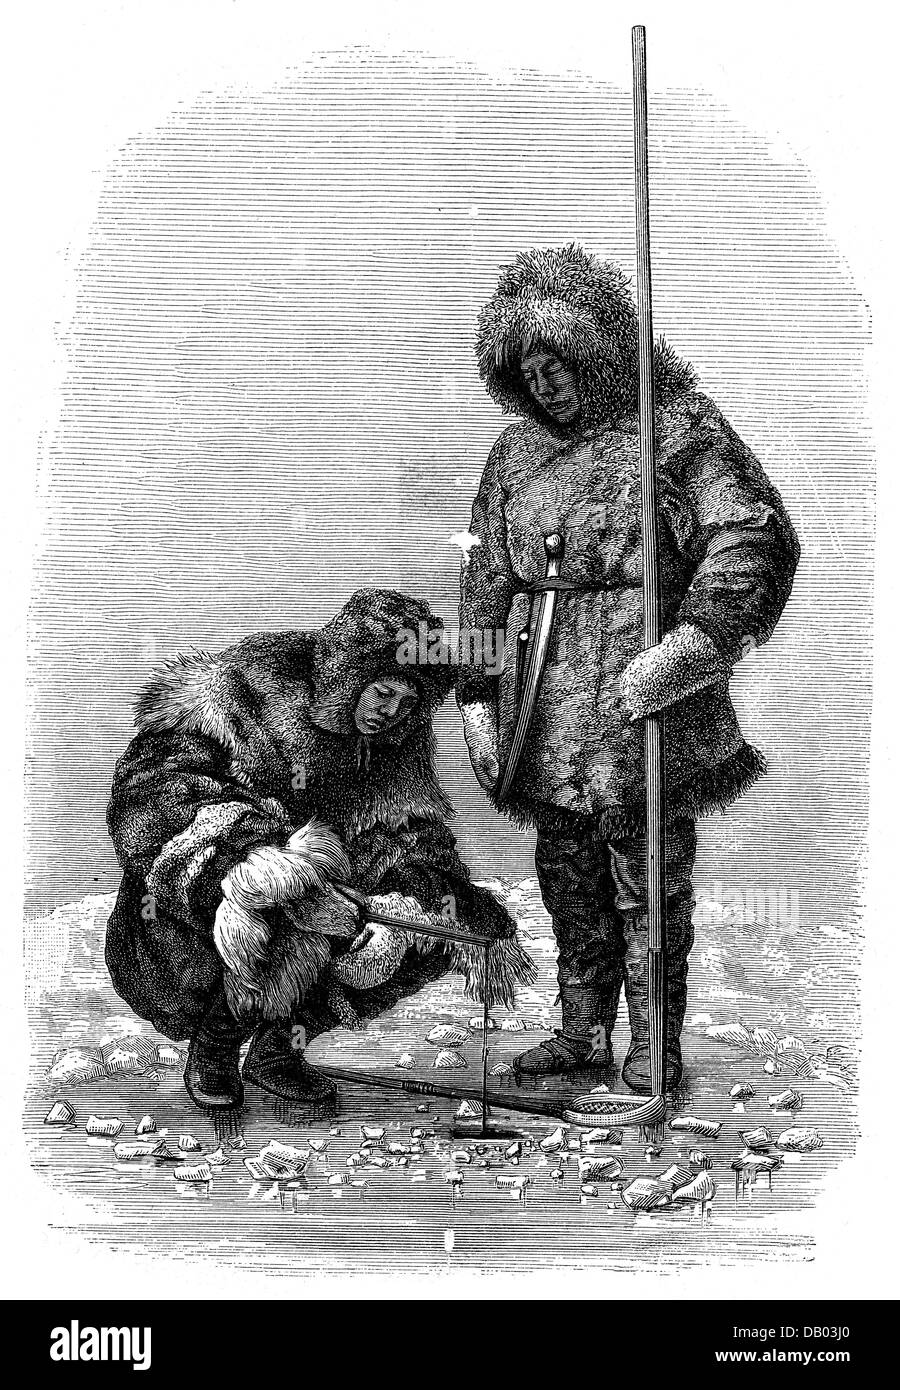 fishing, ice fishing, Chukchi fishing, wood engraving, 19th century, people, ethnic group, Russia, Russian Empire, rope, historic, historical, Additional-Rights-Clearences-Not Available Stock Photo